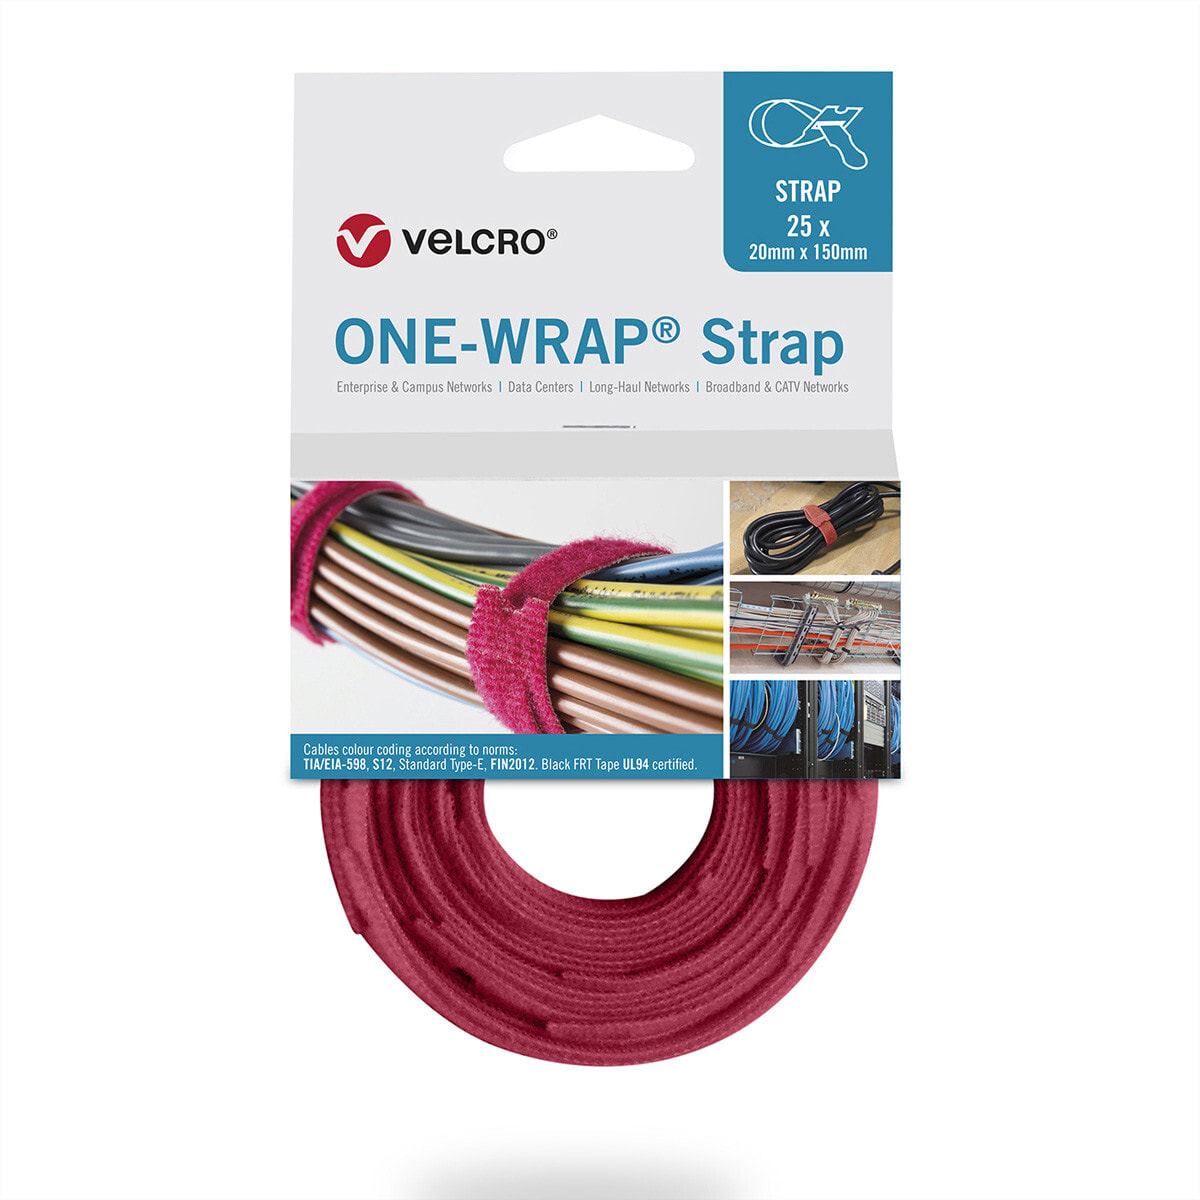 VELCRO ONE-WRAP - Releasable cable tie - Polypropylene (PP) - Velcro - Red - 300 mm - 25 mm - 25 pc(s)